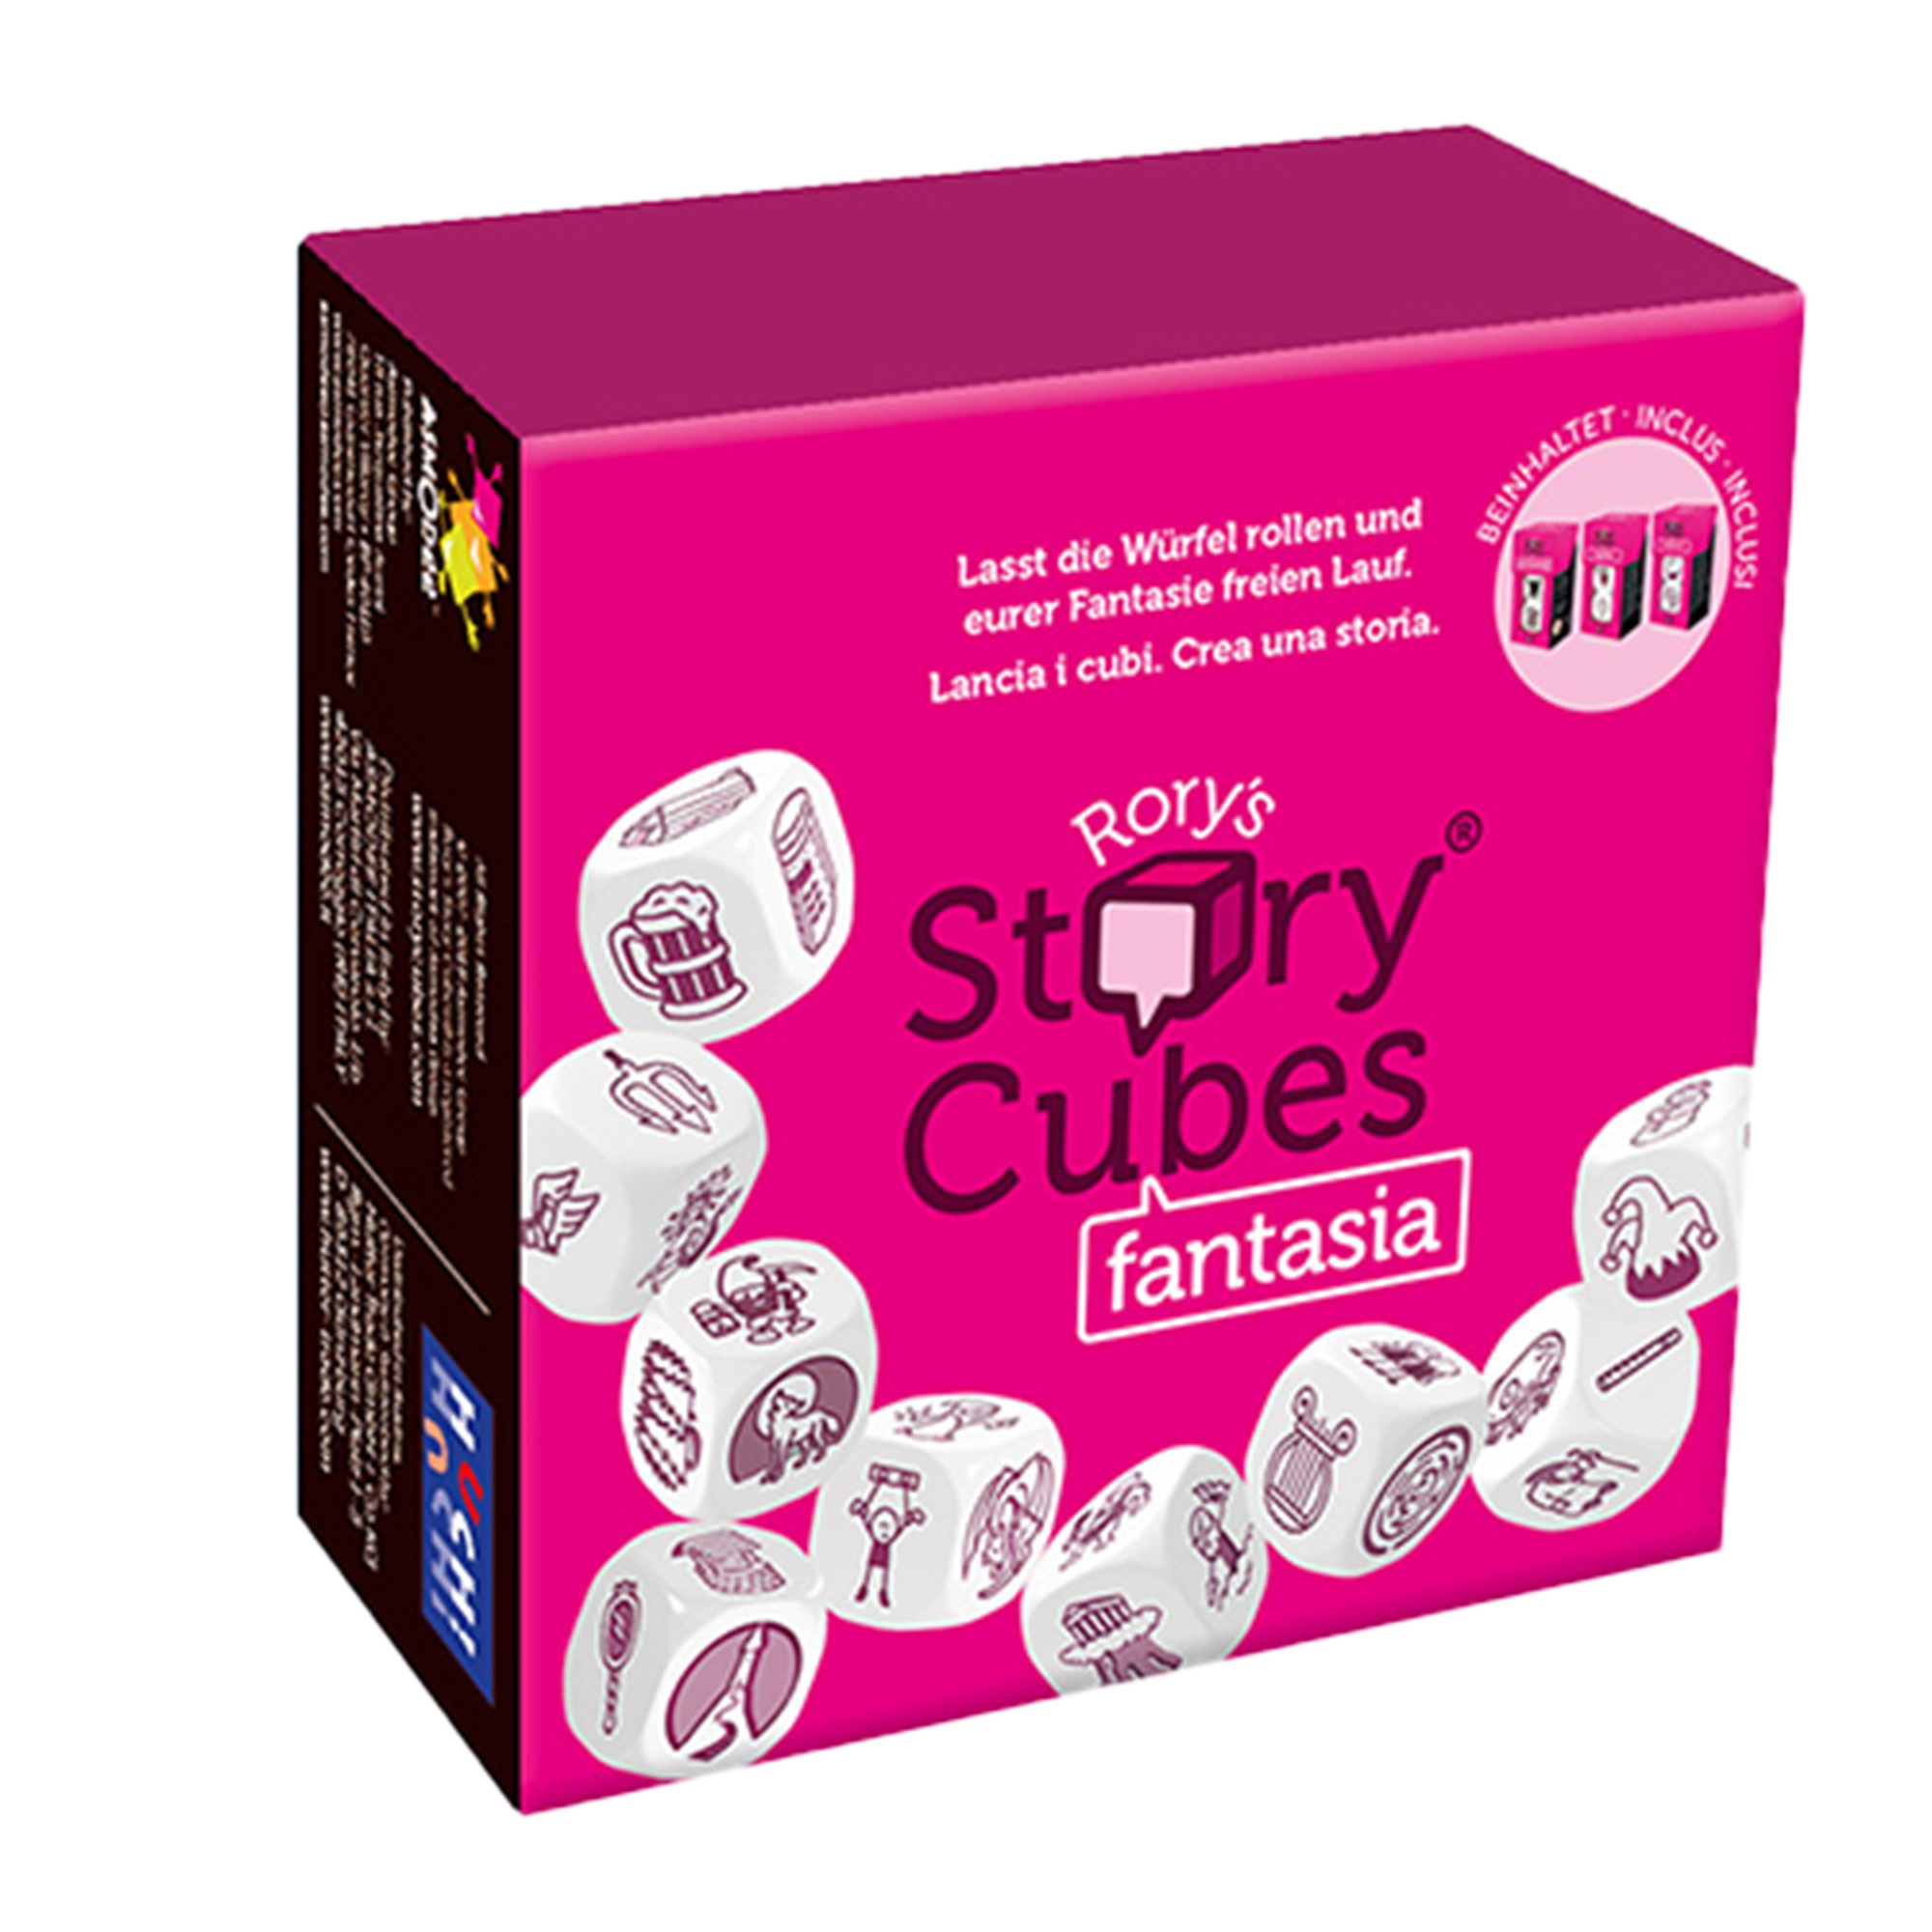 Rory's Story Cubes Fantasia (Fuxia) - Asmodee